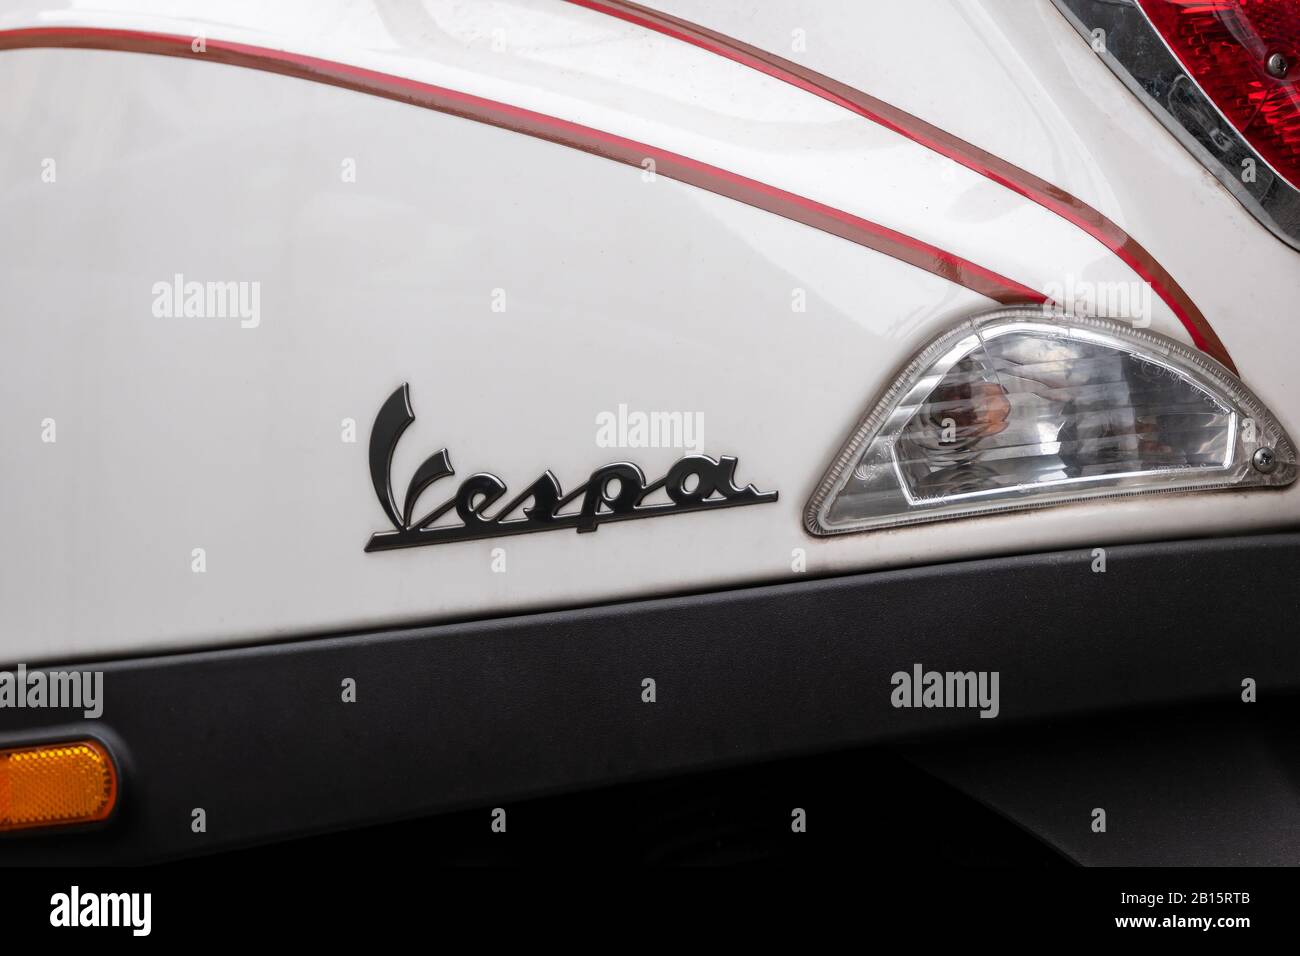 BERLIN, GERMANY - FEBRUARY 12, 2020: Close-up of The Logo of Vespa On A Scooter Manufactured By Italian Manufacturer Piaggio Stock Photo